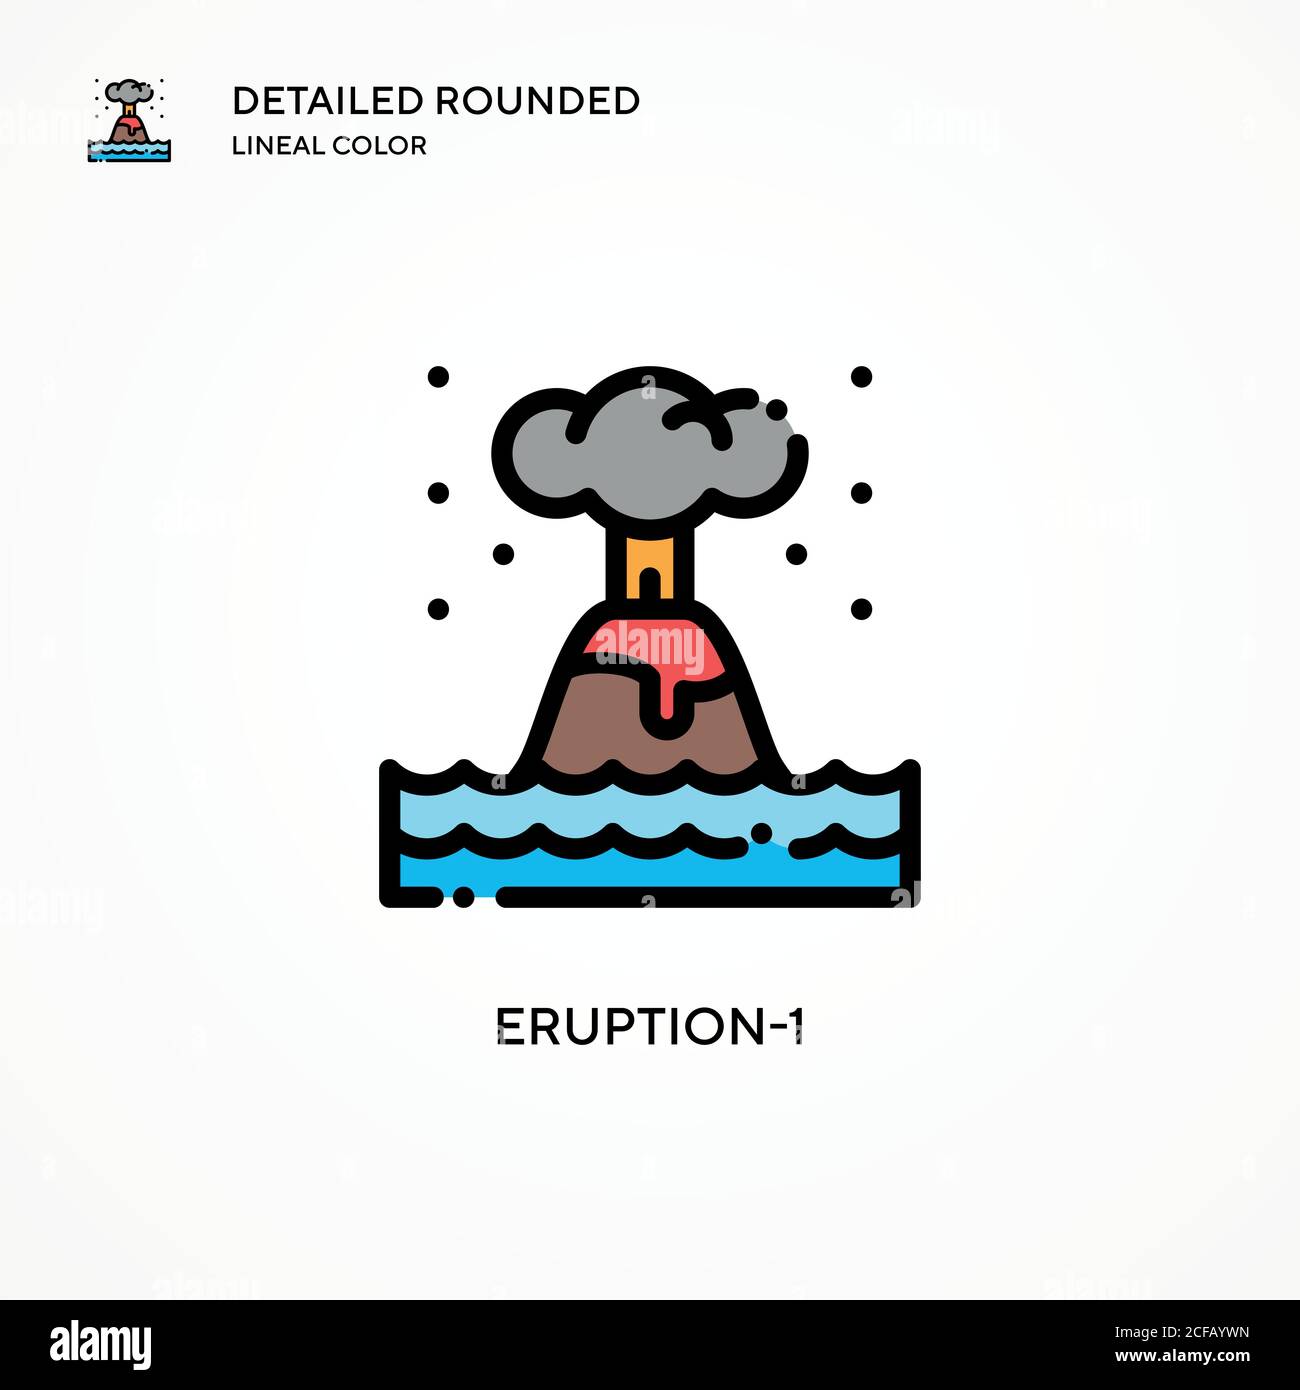 Eruption-1 vector icon. Modern vector illustration concepts. Easy to edit and customize. Stock Vector